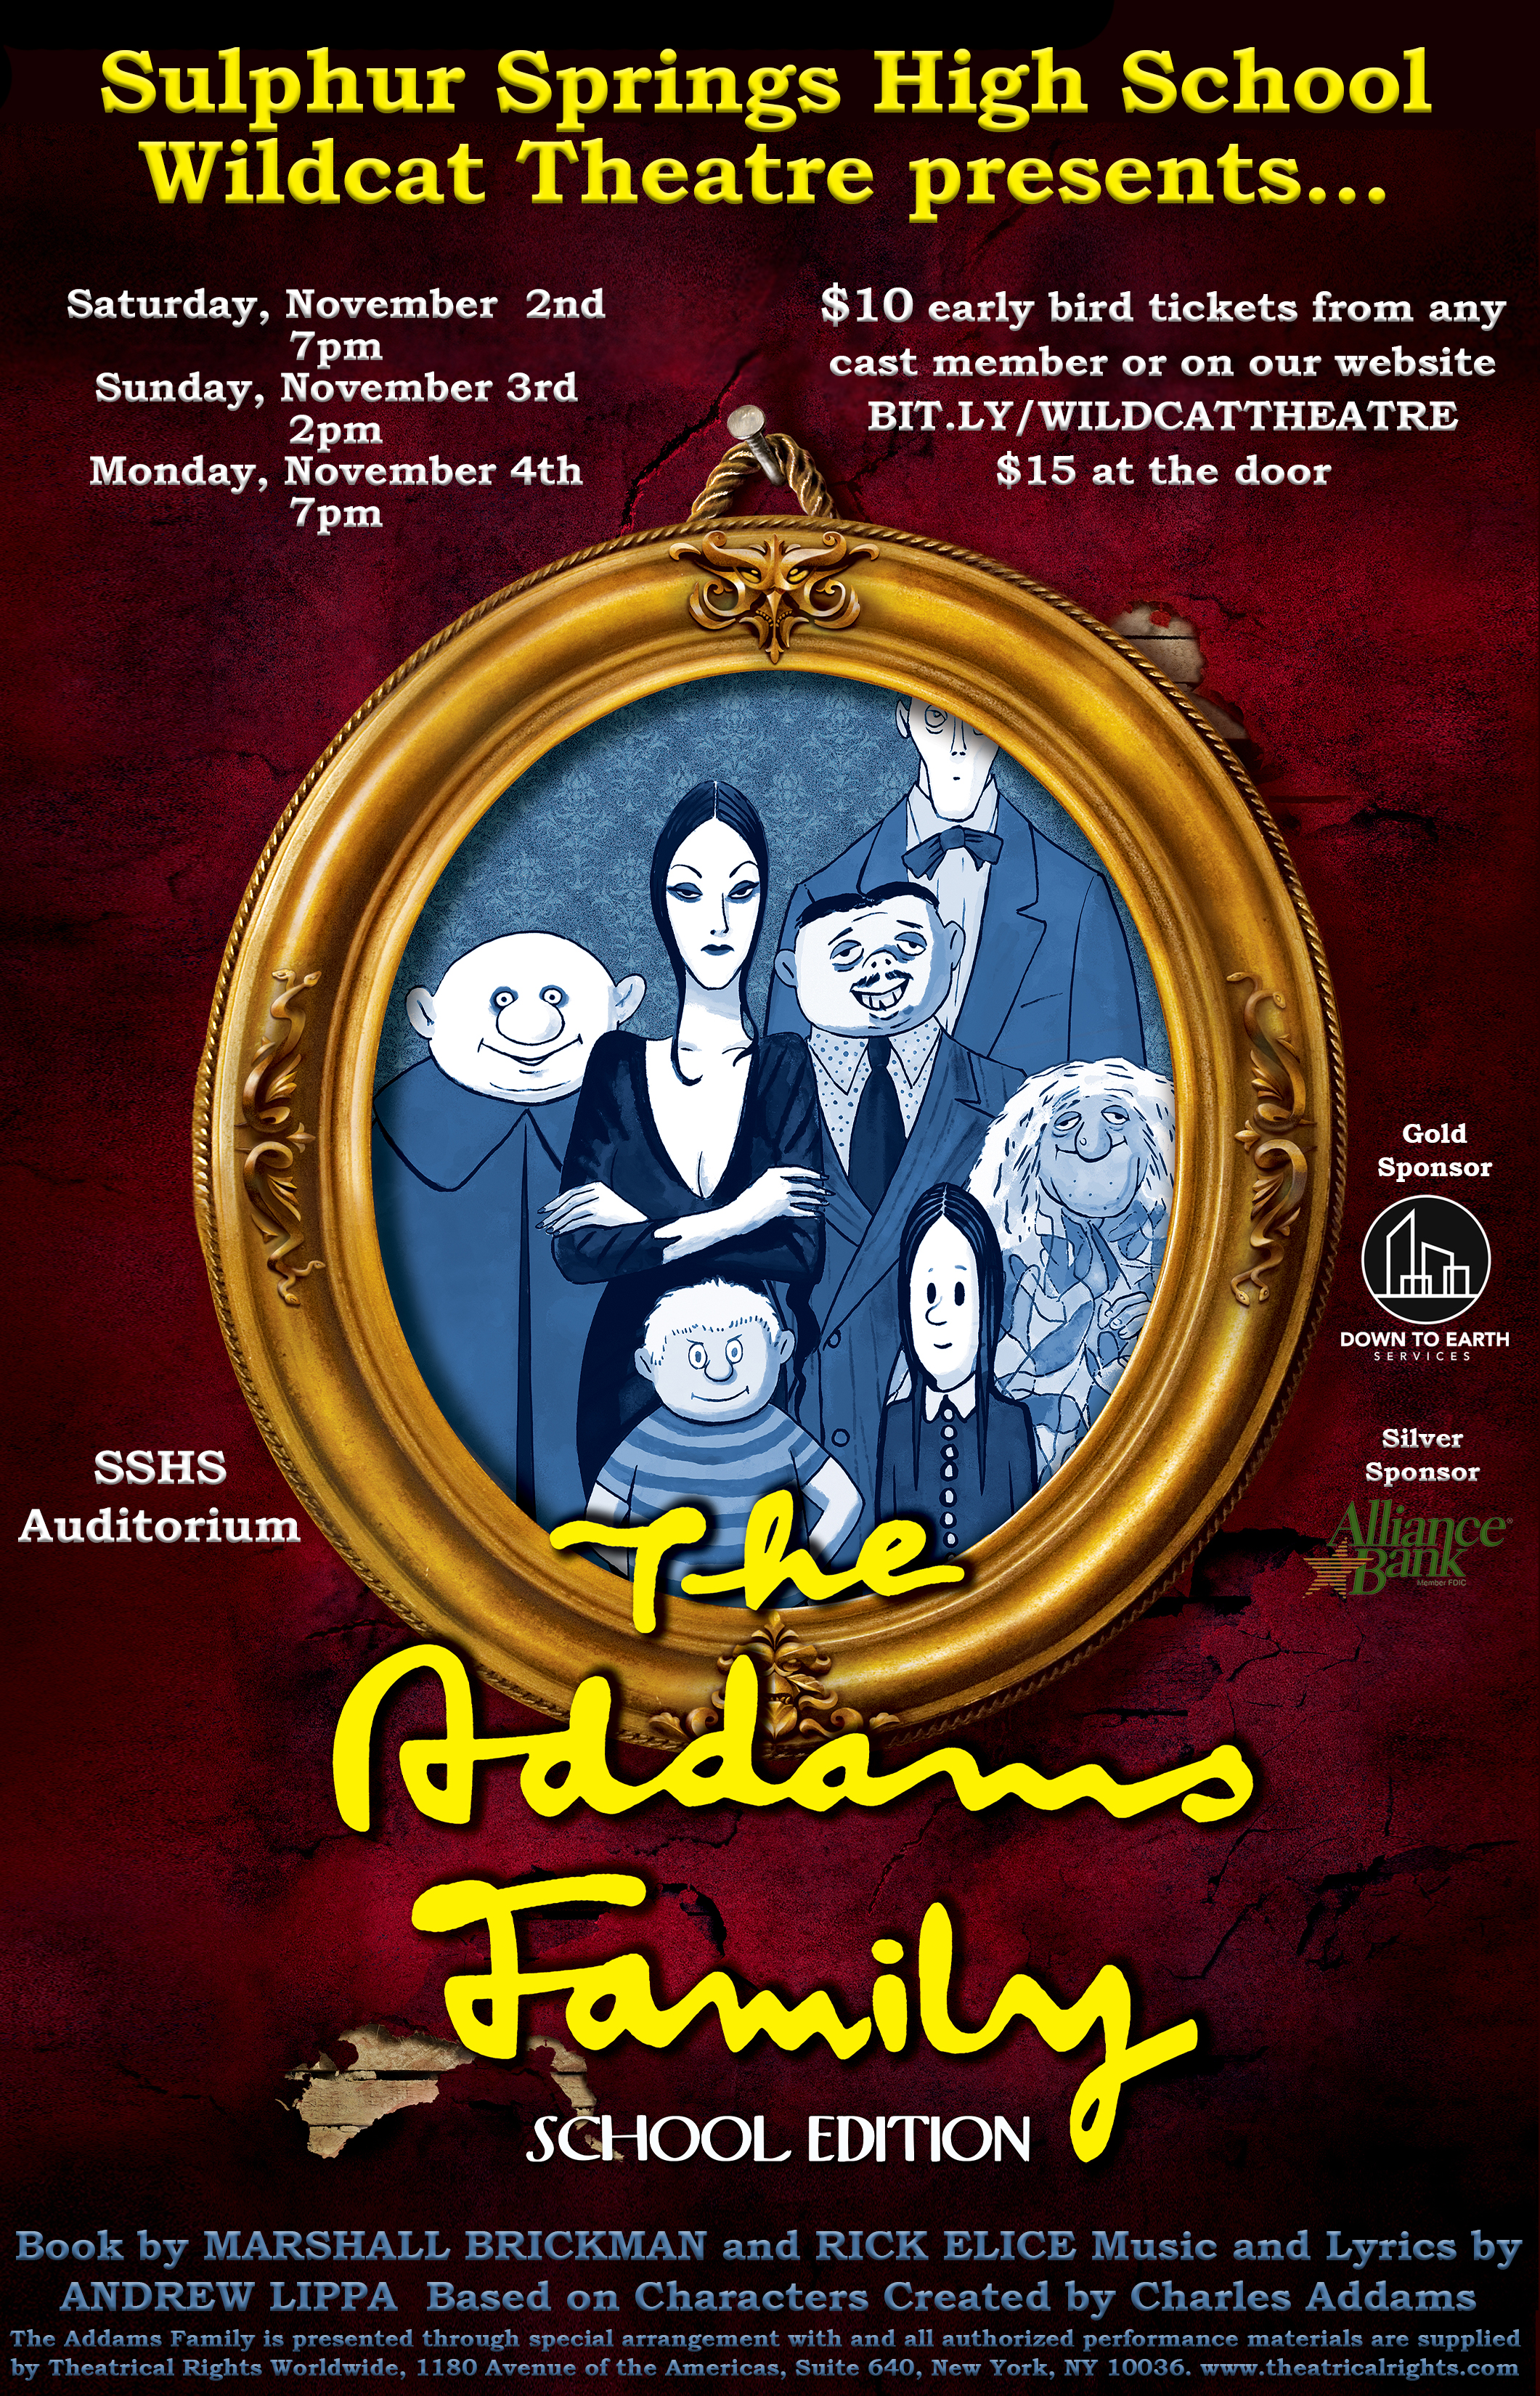 2019 Hopkins County Fall Festival Entertainment Will Be SSHS Theatre Performing The Addams Family Musical November 2nd-4th